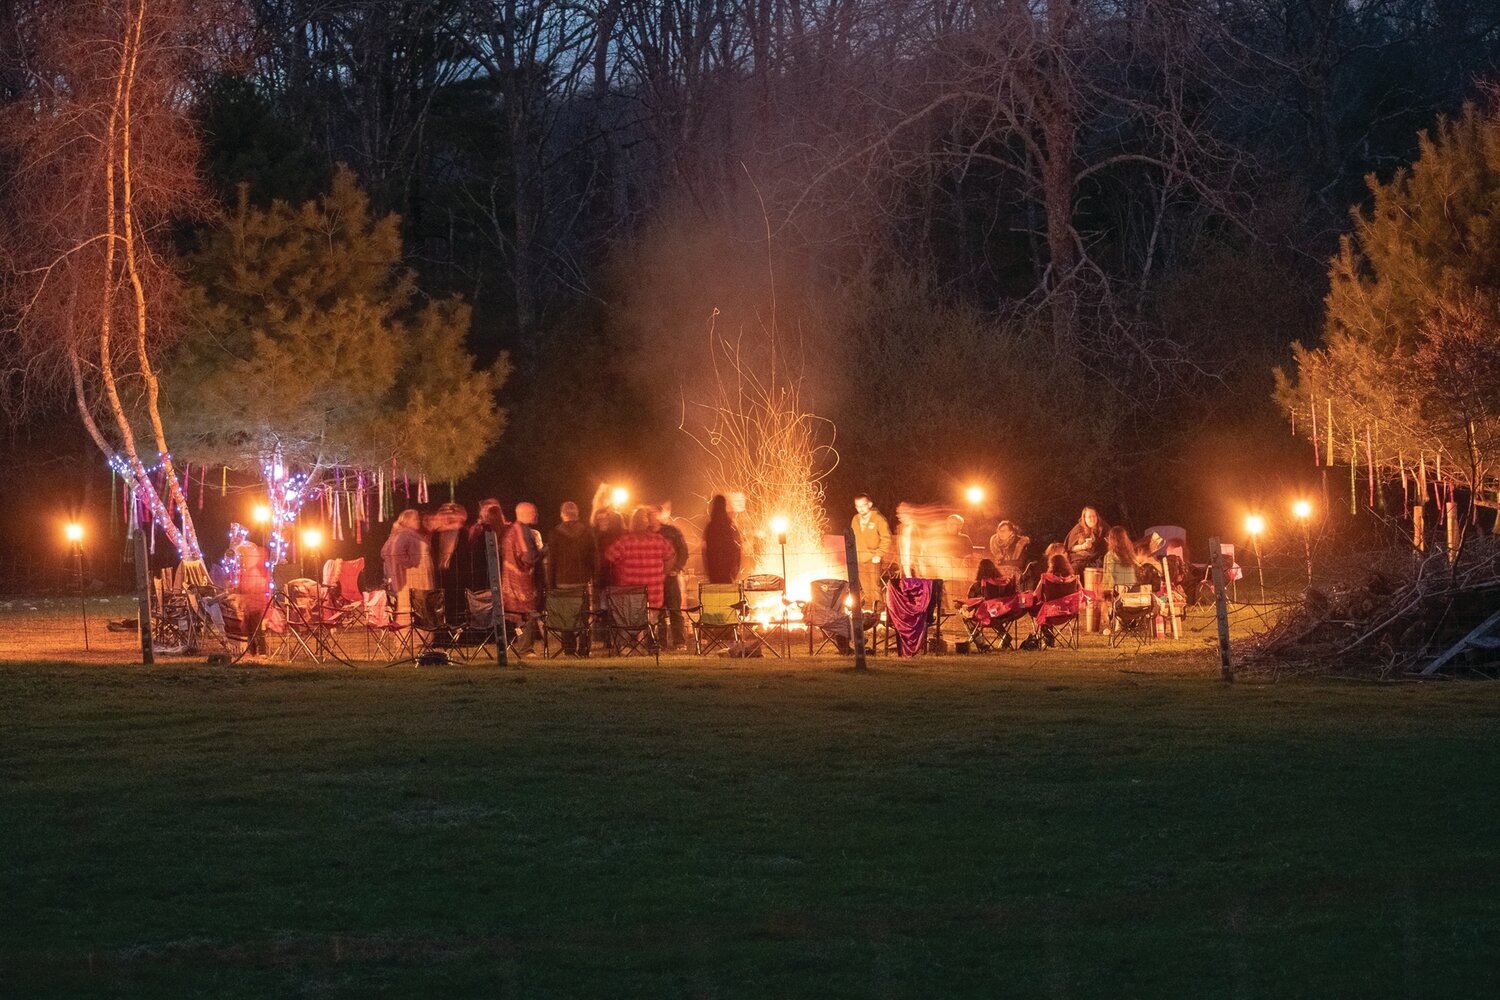 HOT TAKE: The Beltane Fire was hosted by Horn and Cauldron with many members of RI PPD in attendance.